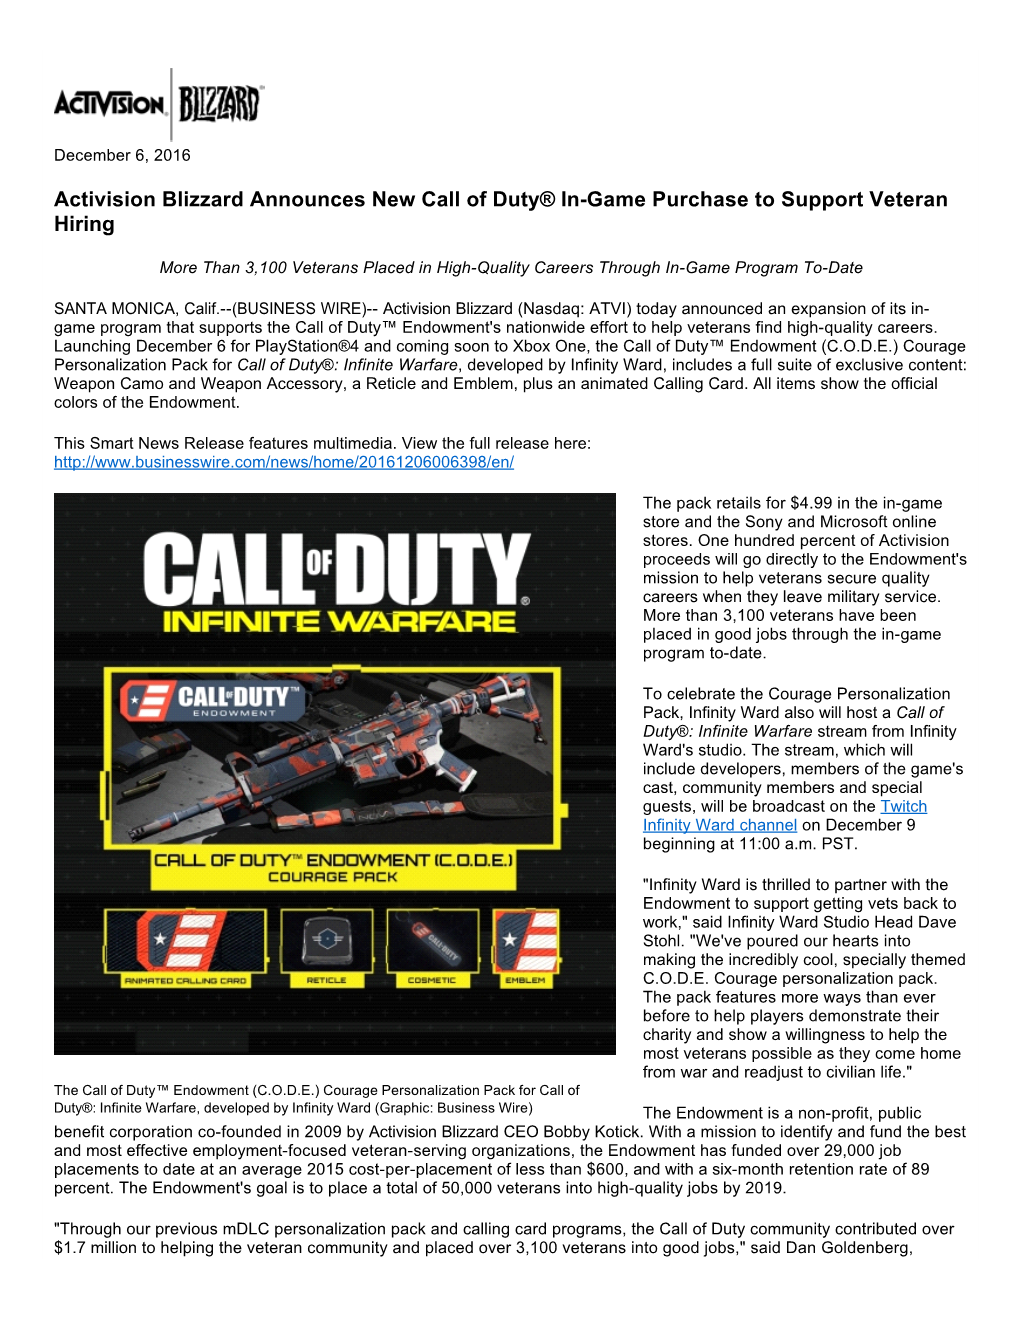 Activision Blizzard Announces New Call of Duty® In-Game Purchase to Support Veteran Hiring